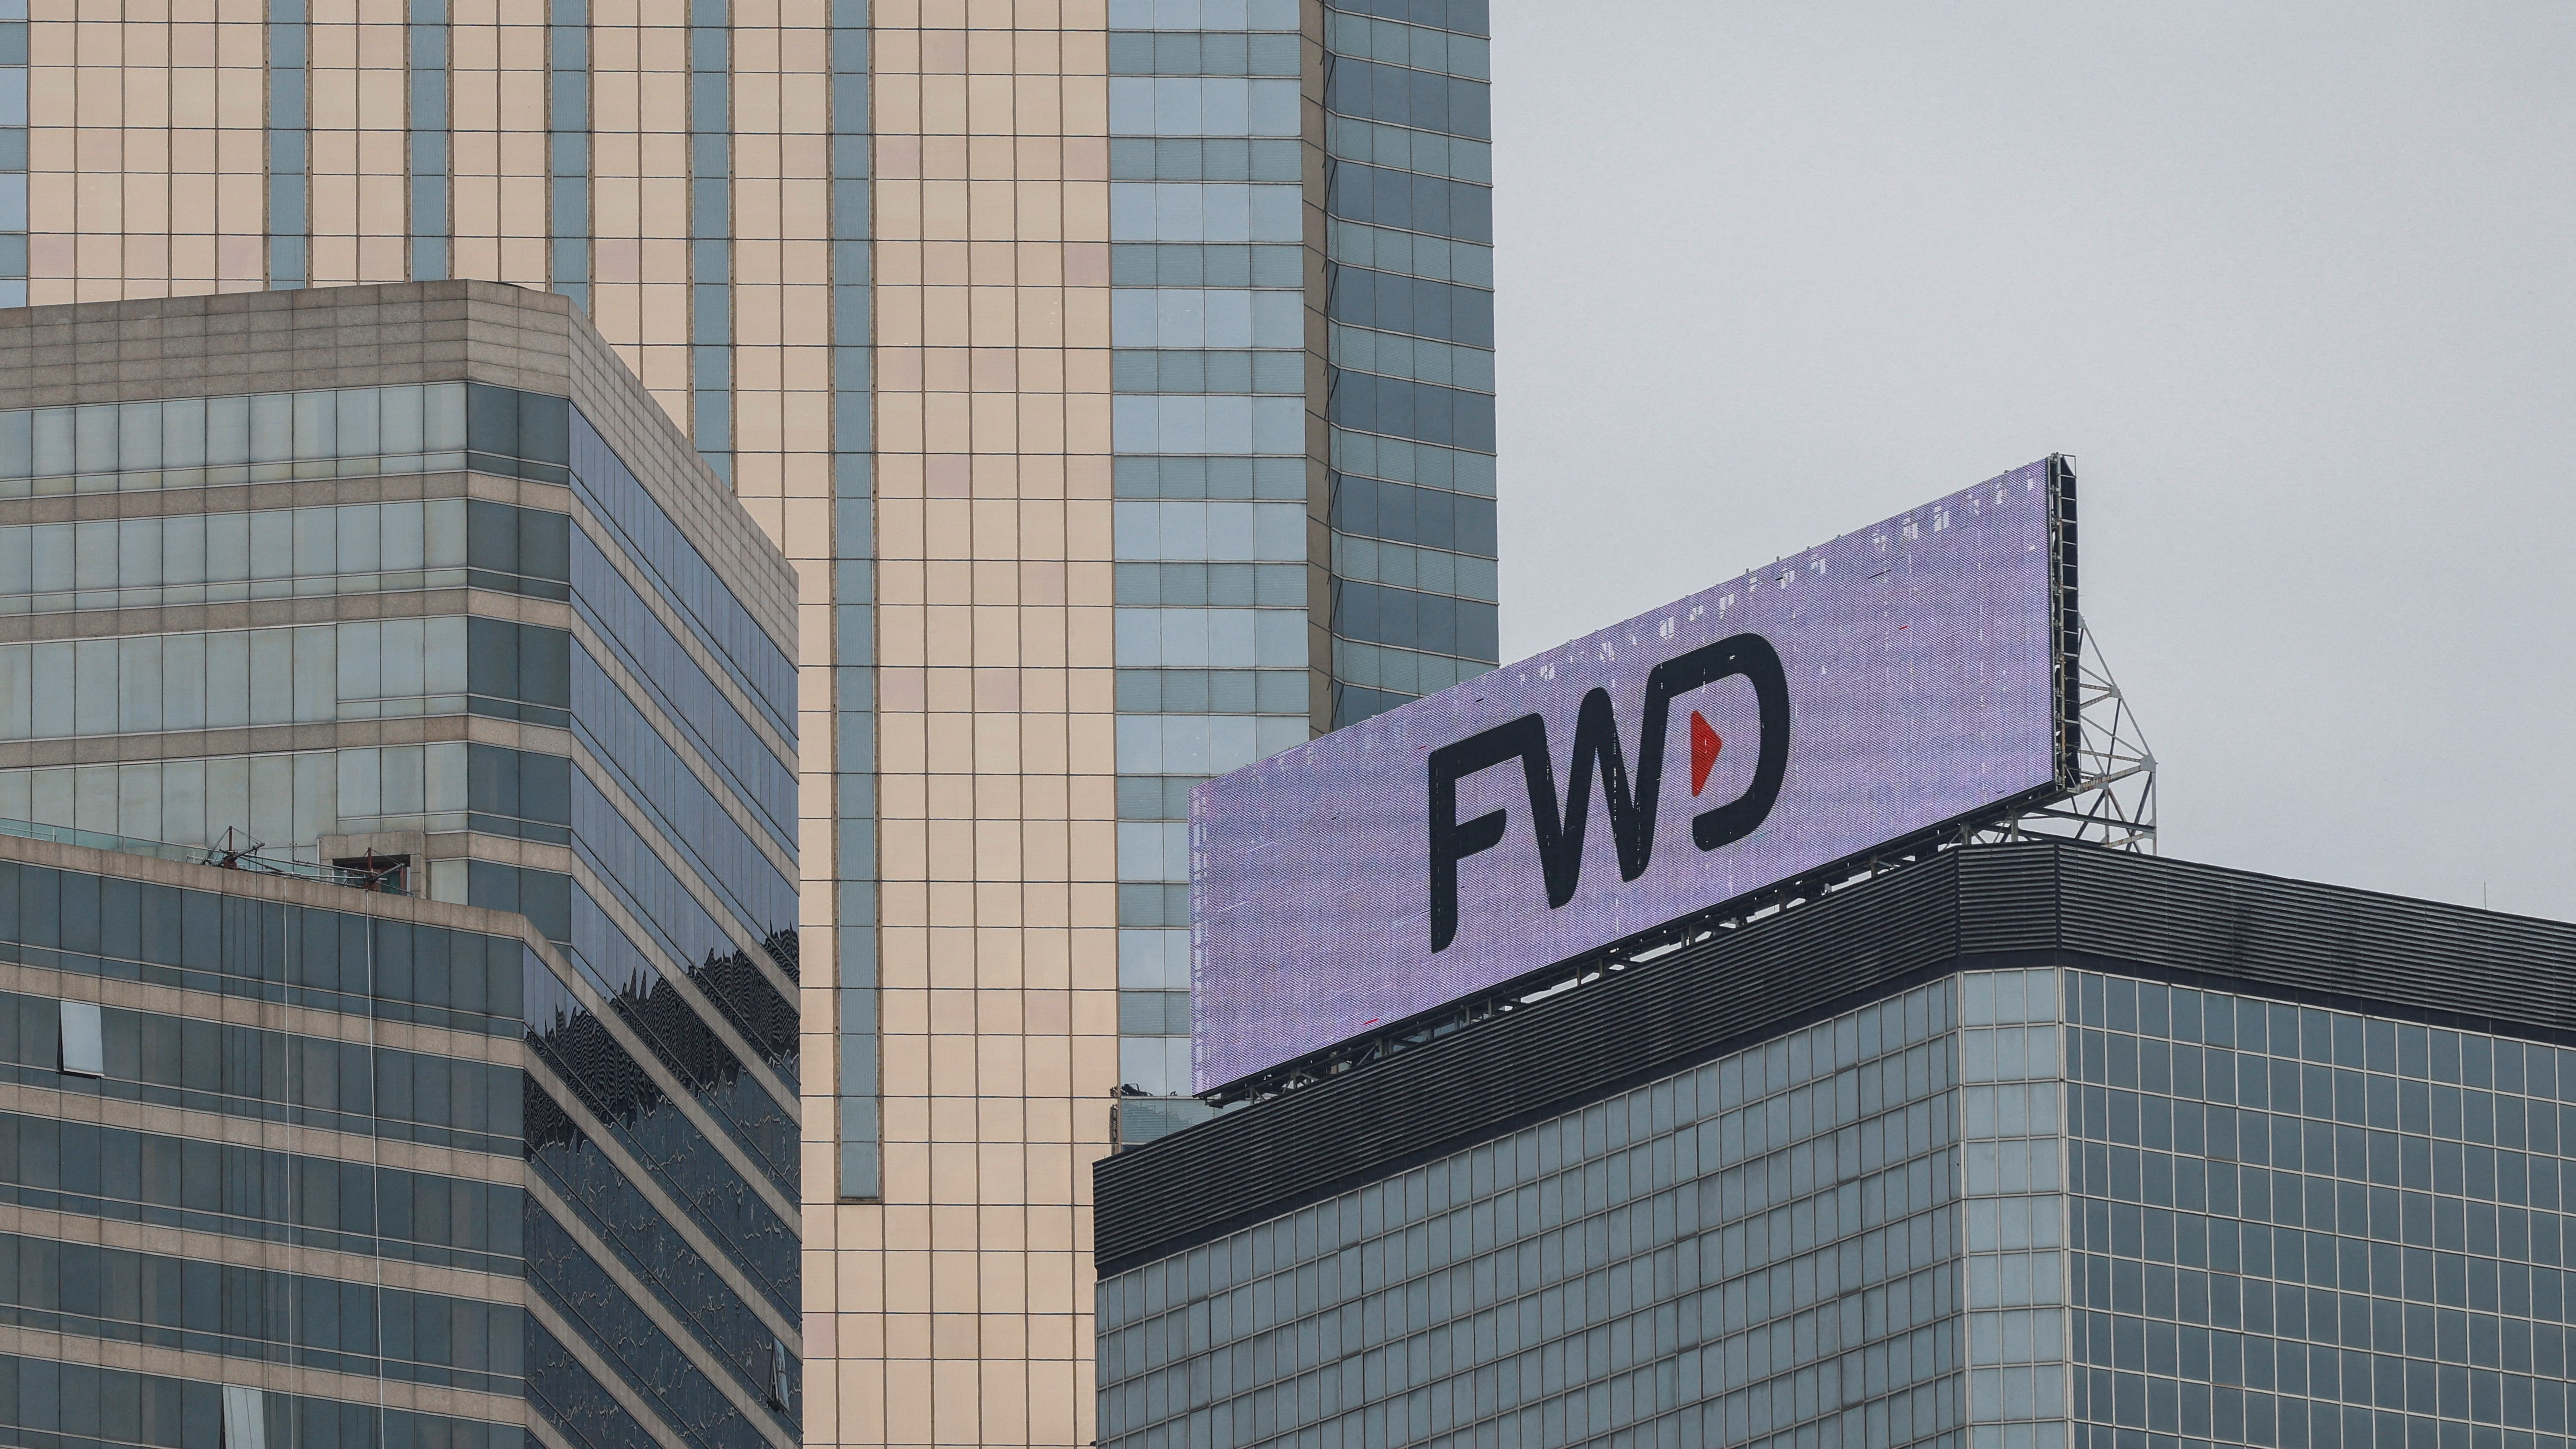 The logo of FWD group is seen on a building in Hong Kong